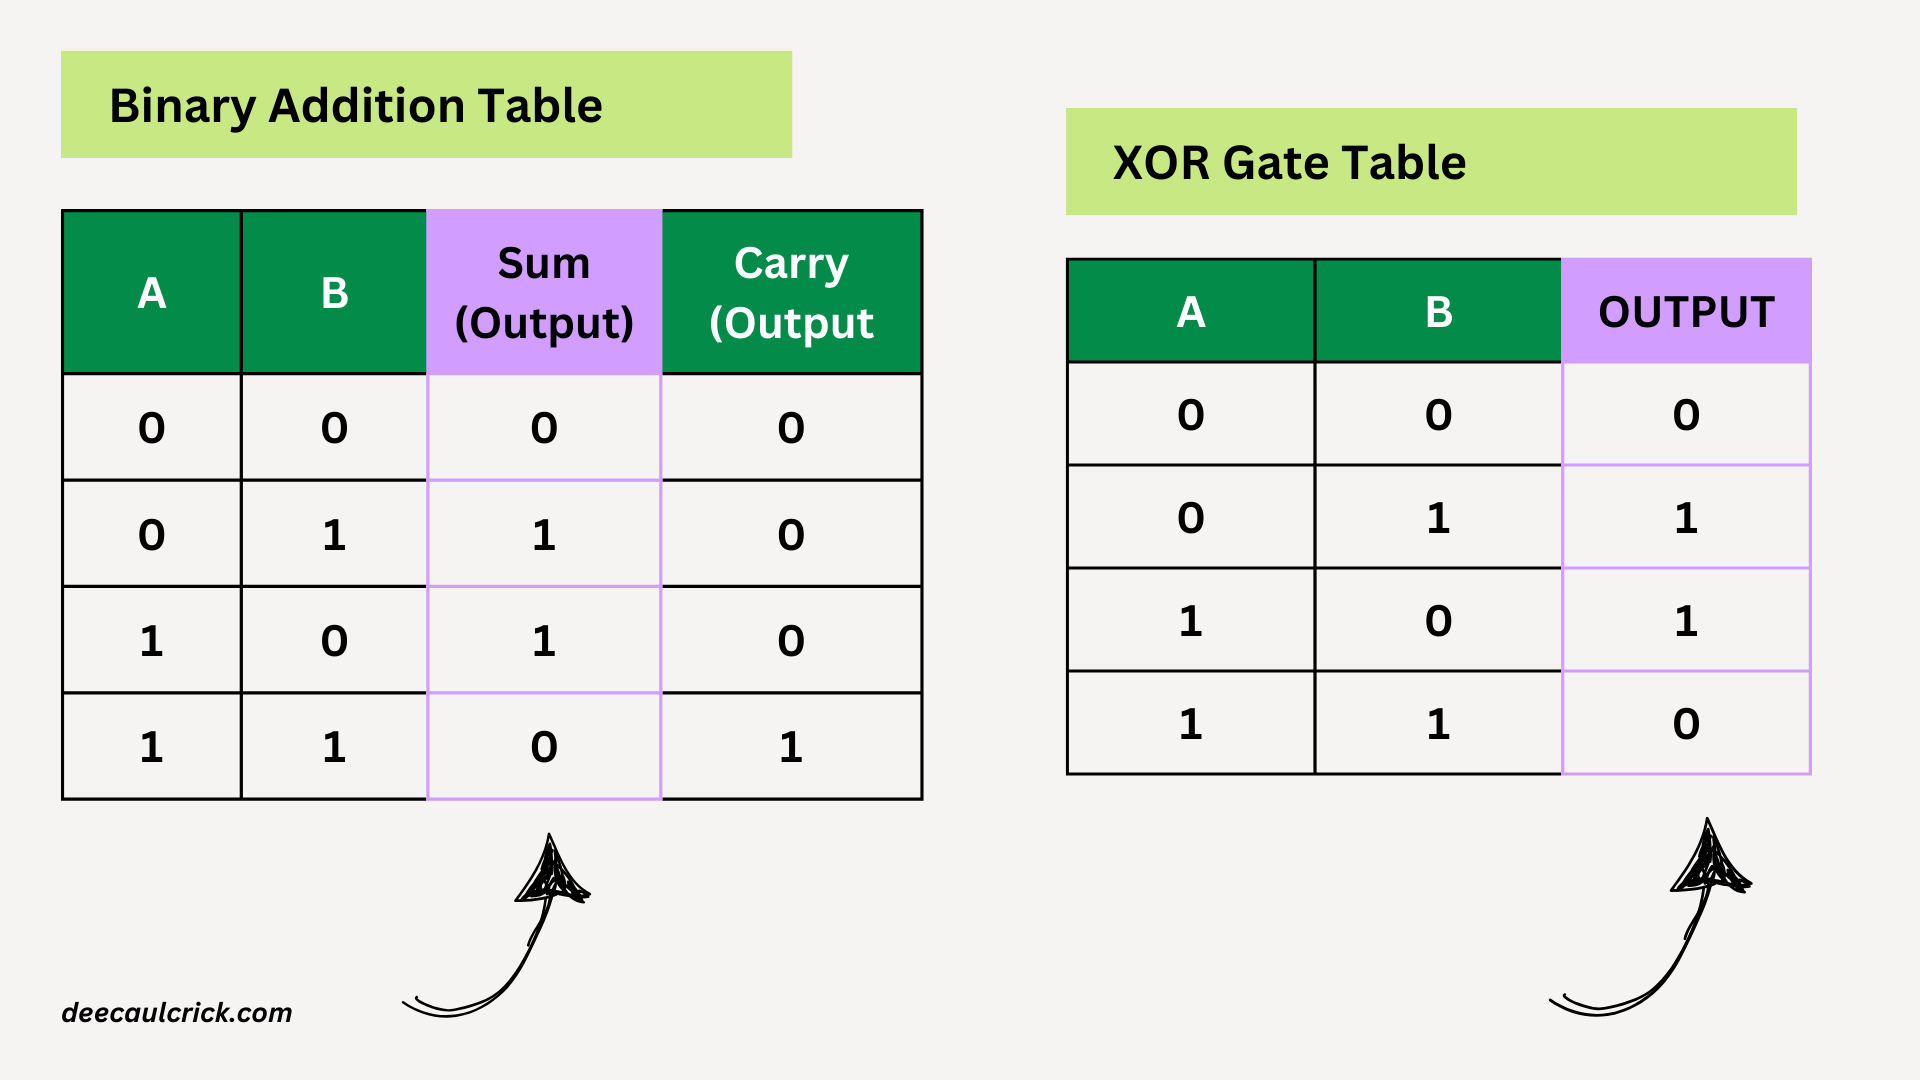 Comparison between Sum Output and XOR gate